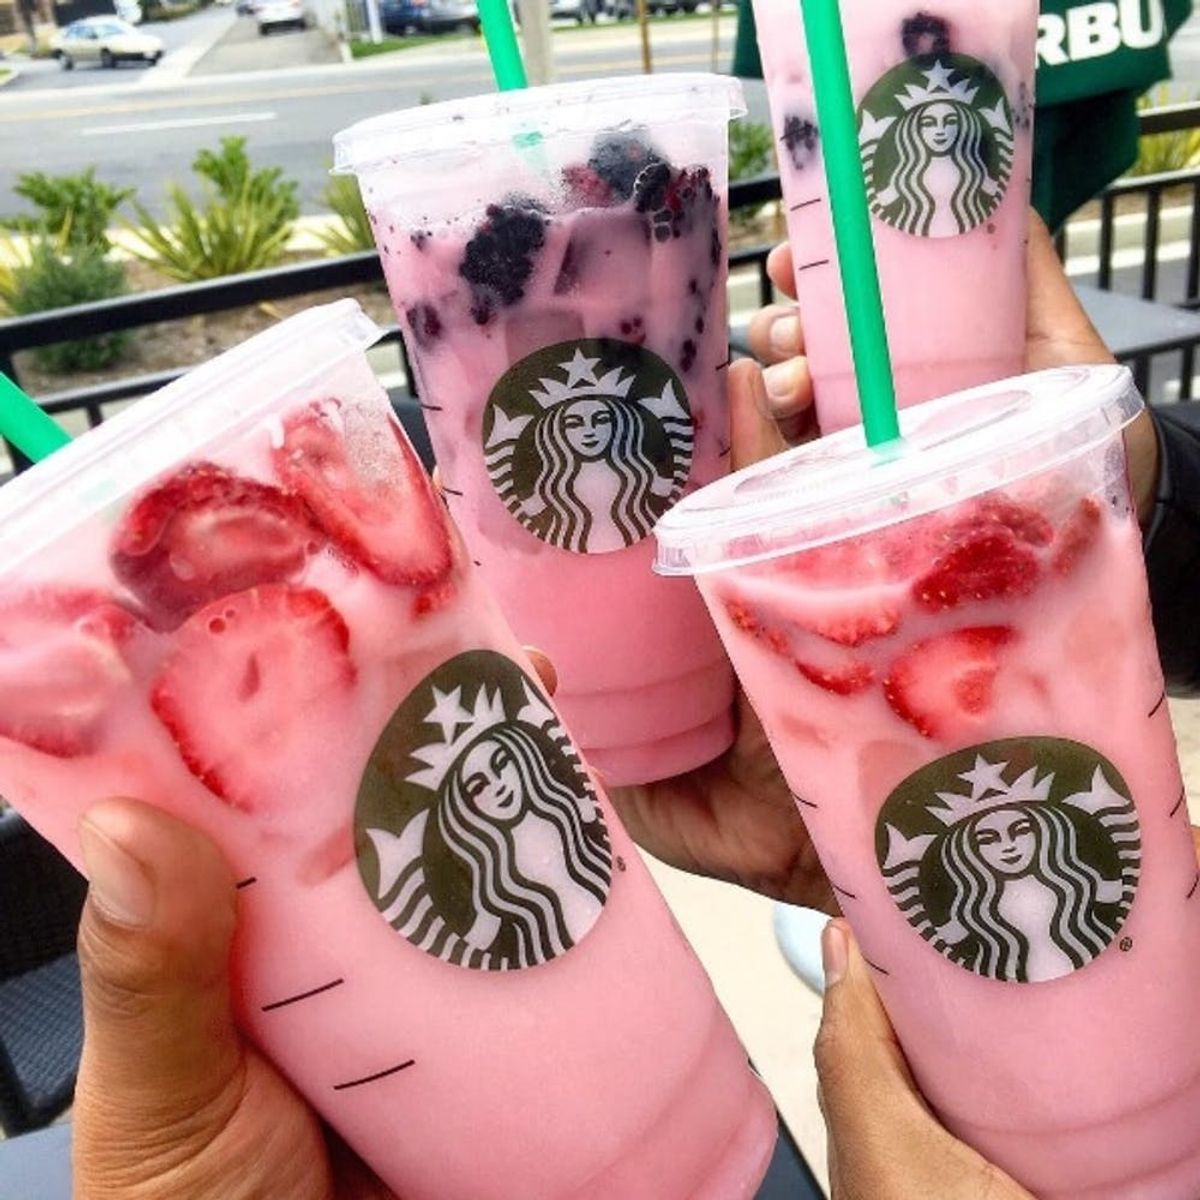 Here’s What’s in Starbucks’ Secret New Pink Drink That’s Sweeping the Internet